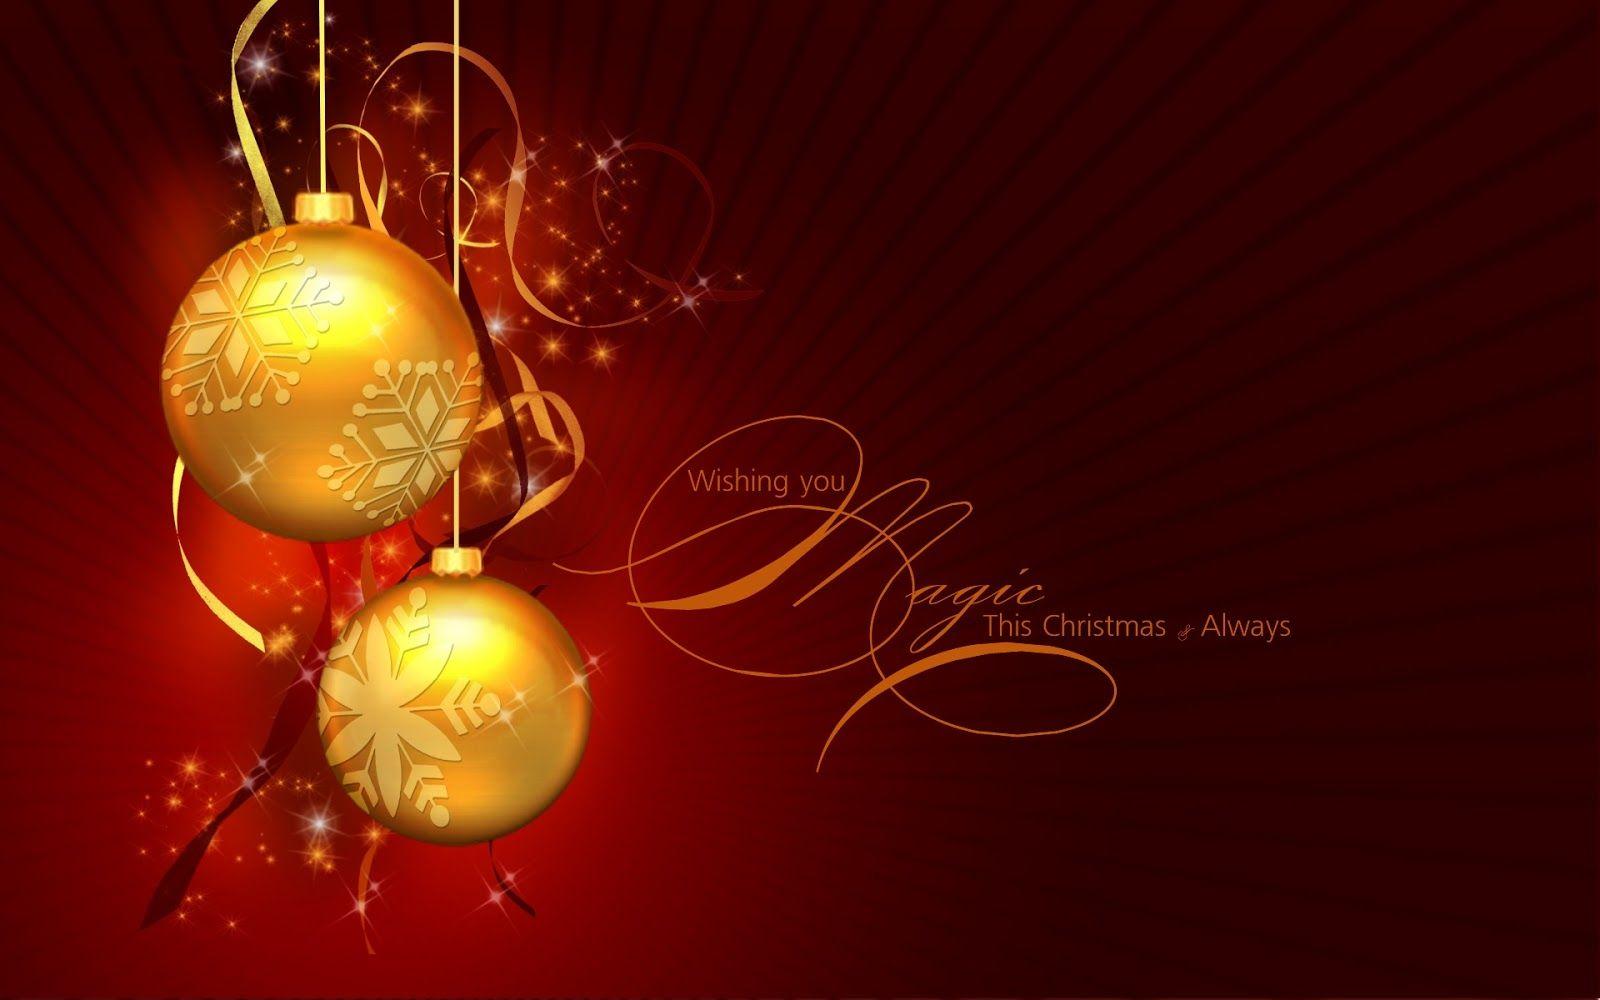 BEST GREETINGS: Happy Holiday Wallpaper and Greeting Cards 2013